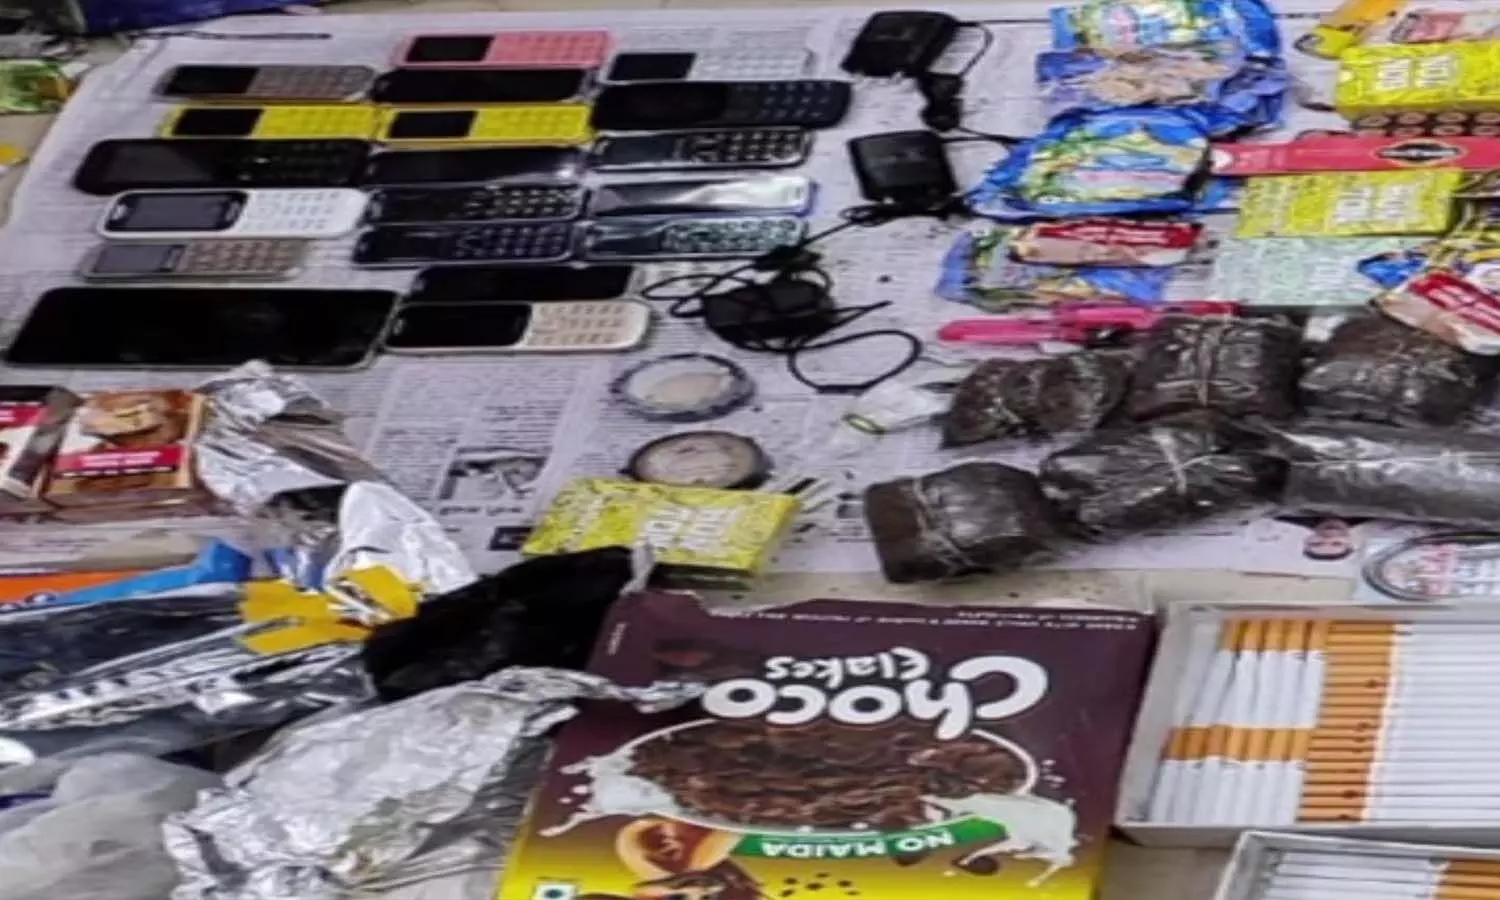 Search operation in the most secure jail of Bihar, 1.25 kg of ganja, 19 mobiles including many banned items recovered